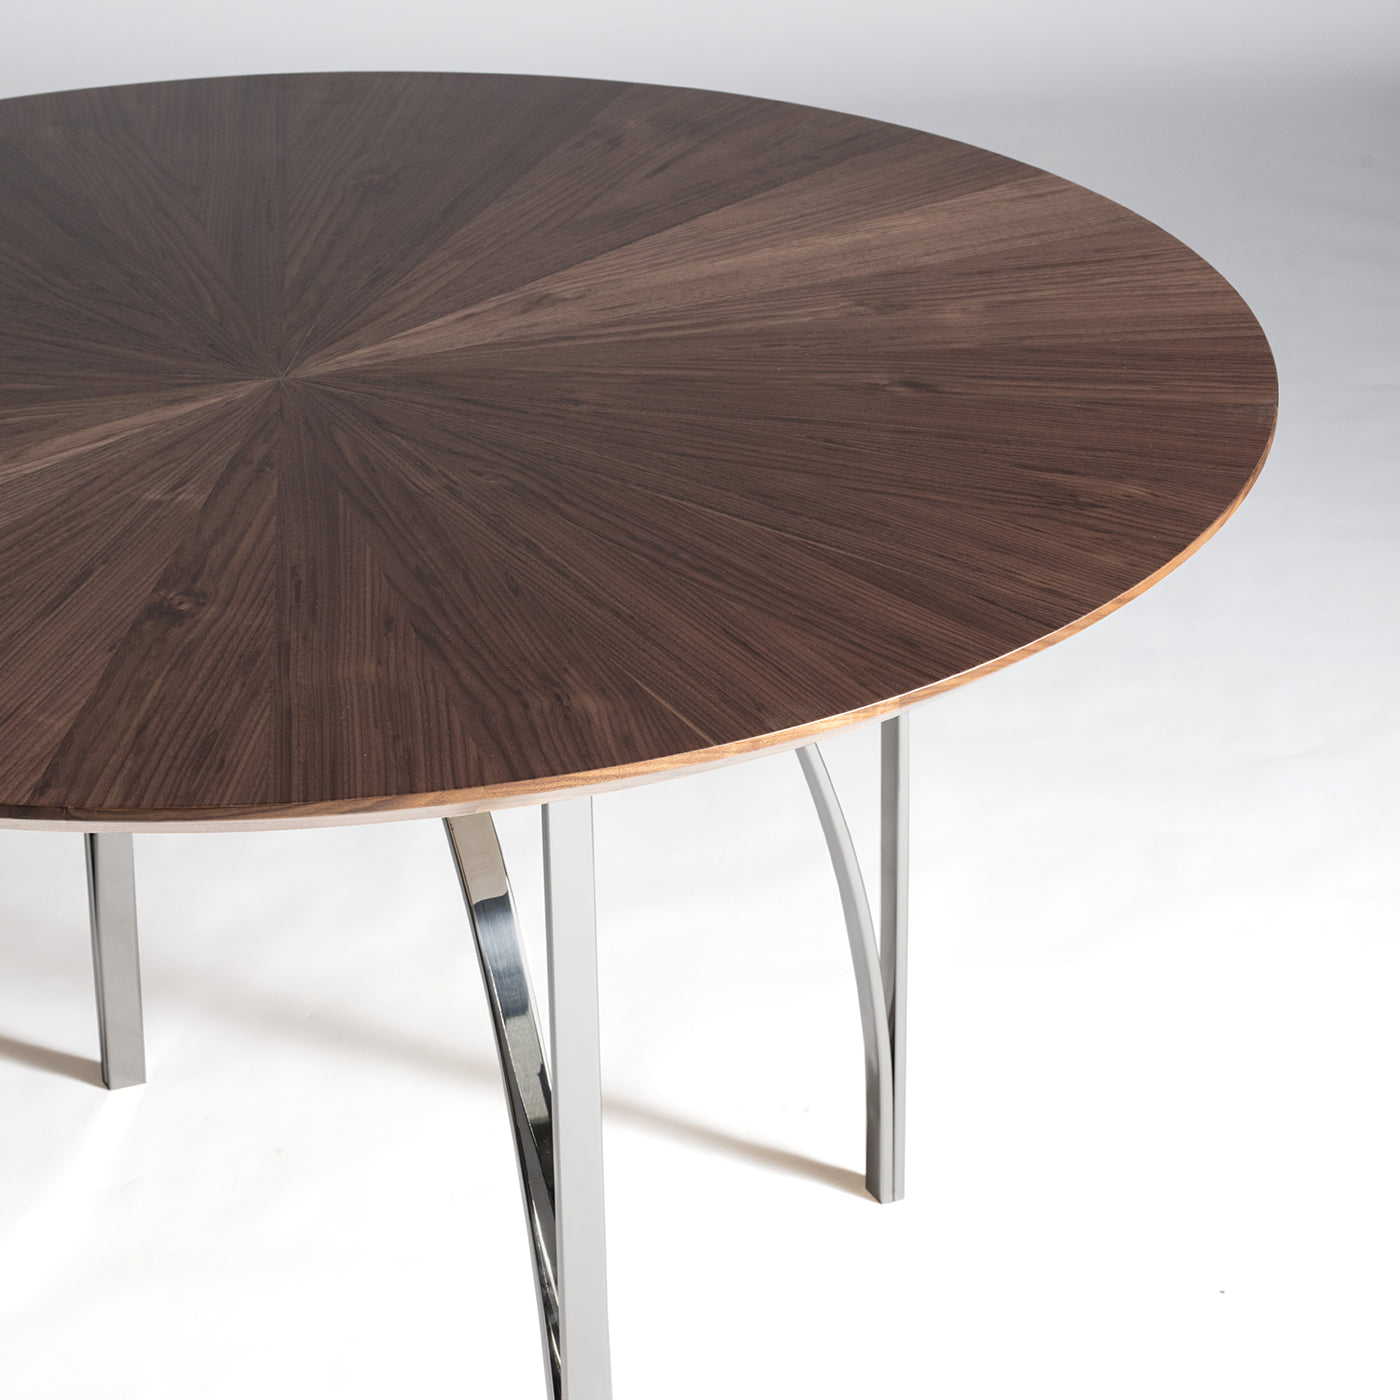 Archie Collection Canaletto Walnut Dining Table  - Alternative view 1